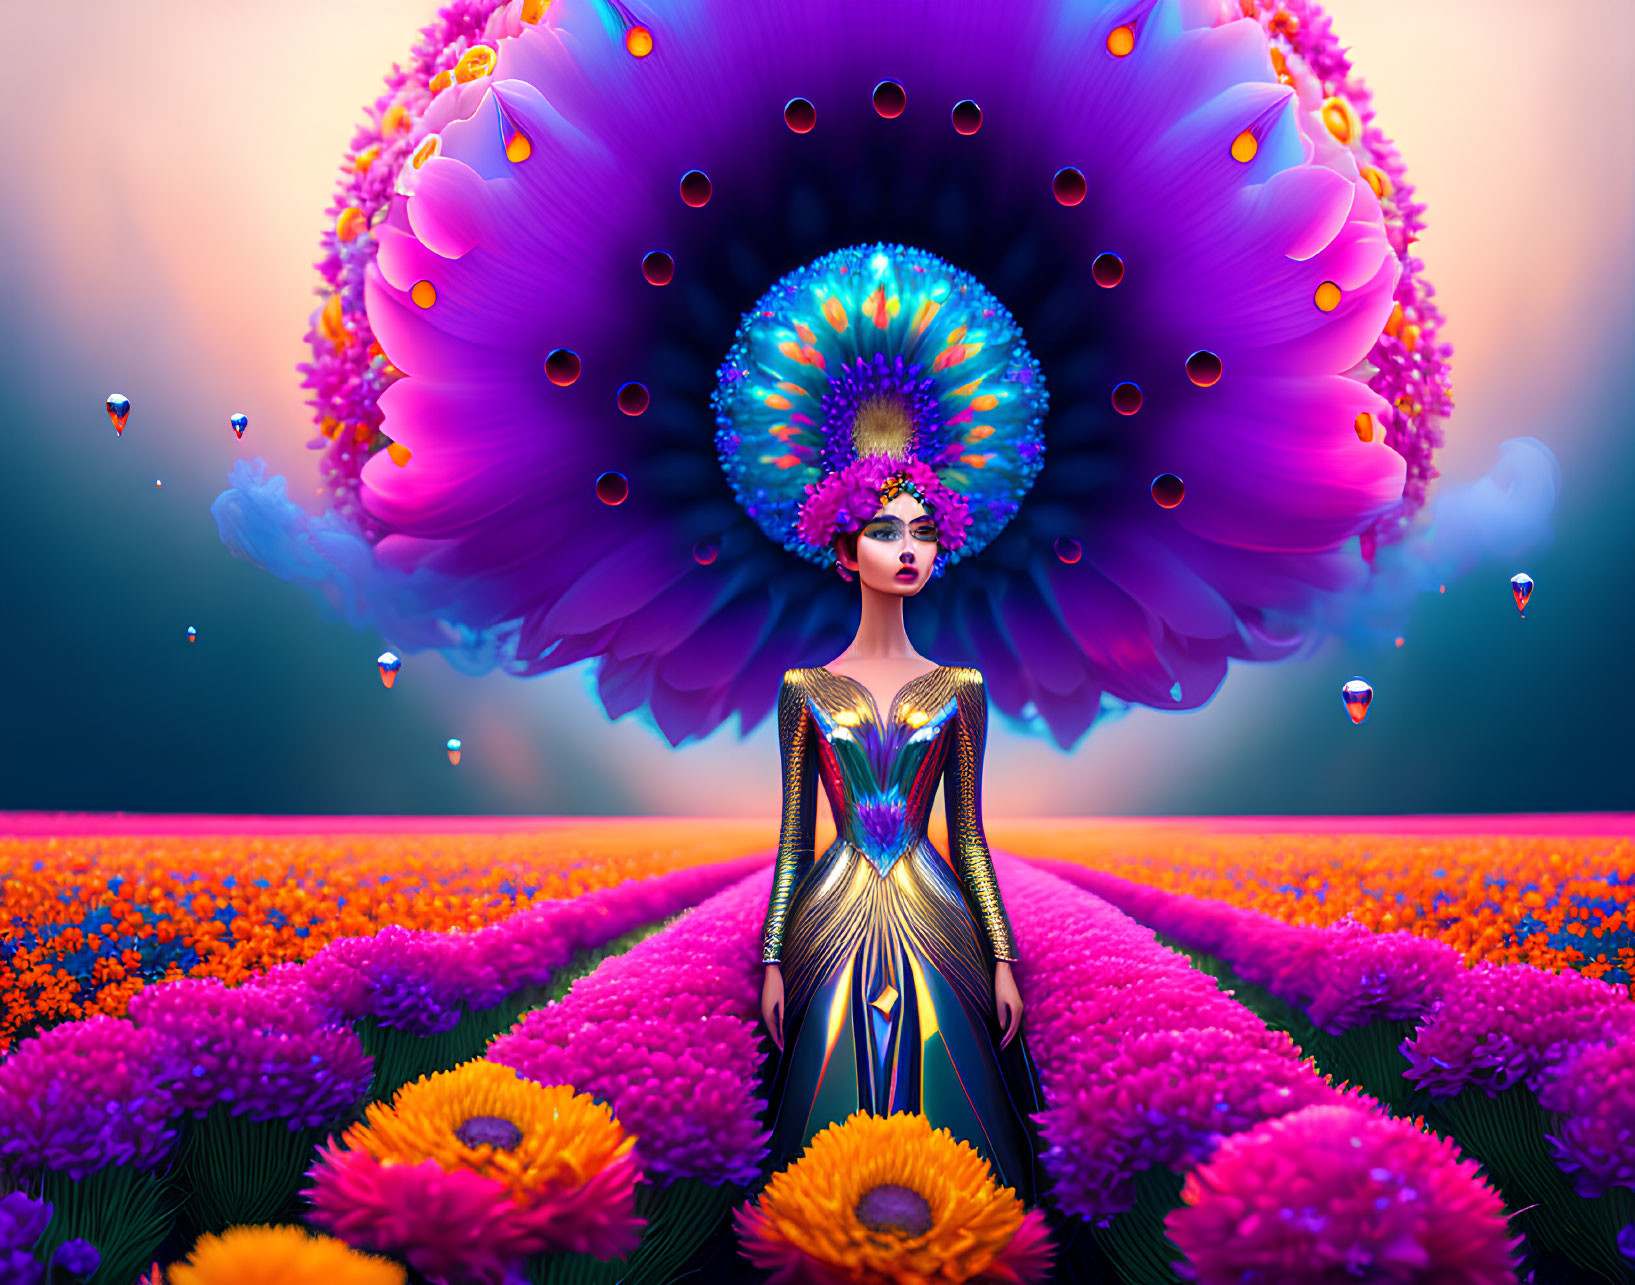 Woman in vibrant dress with surreal peacock headdress in flower field sunset scene